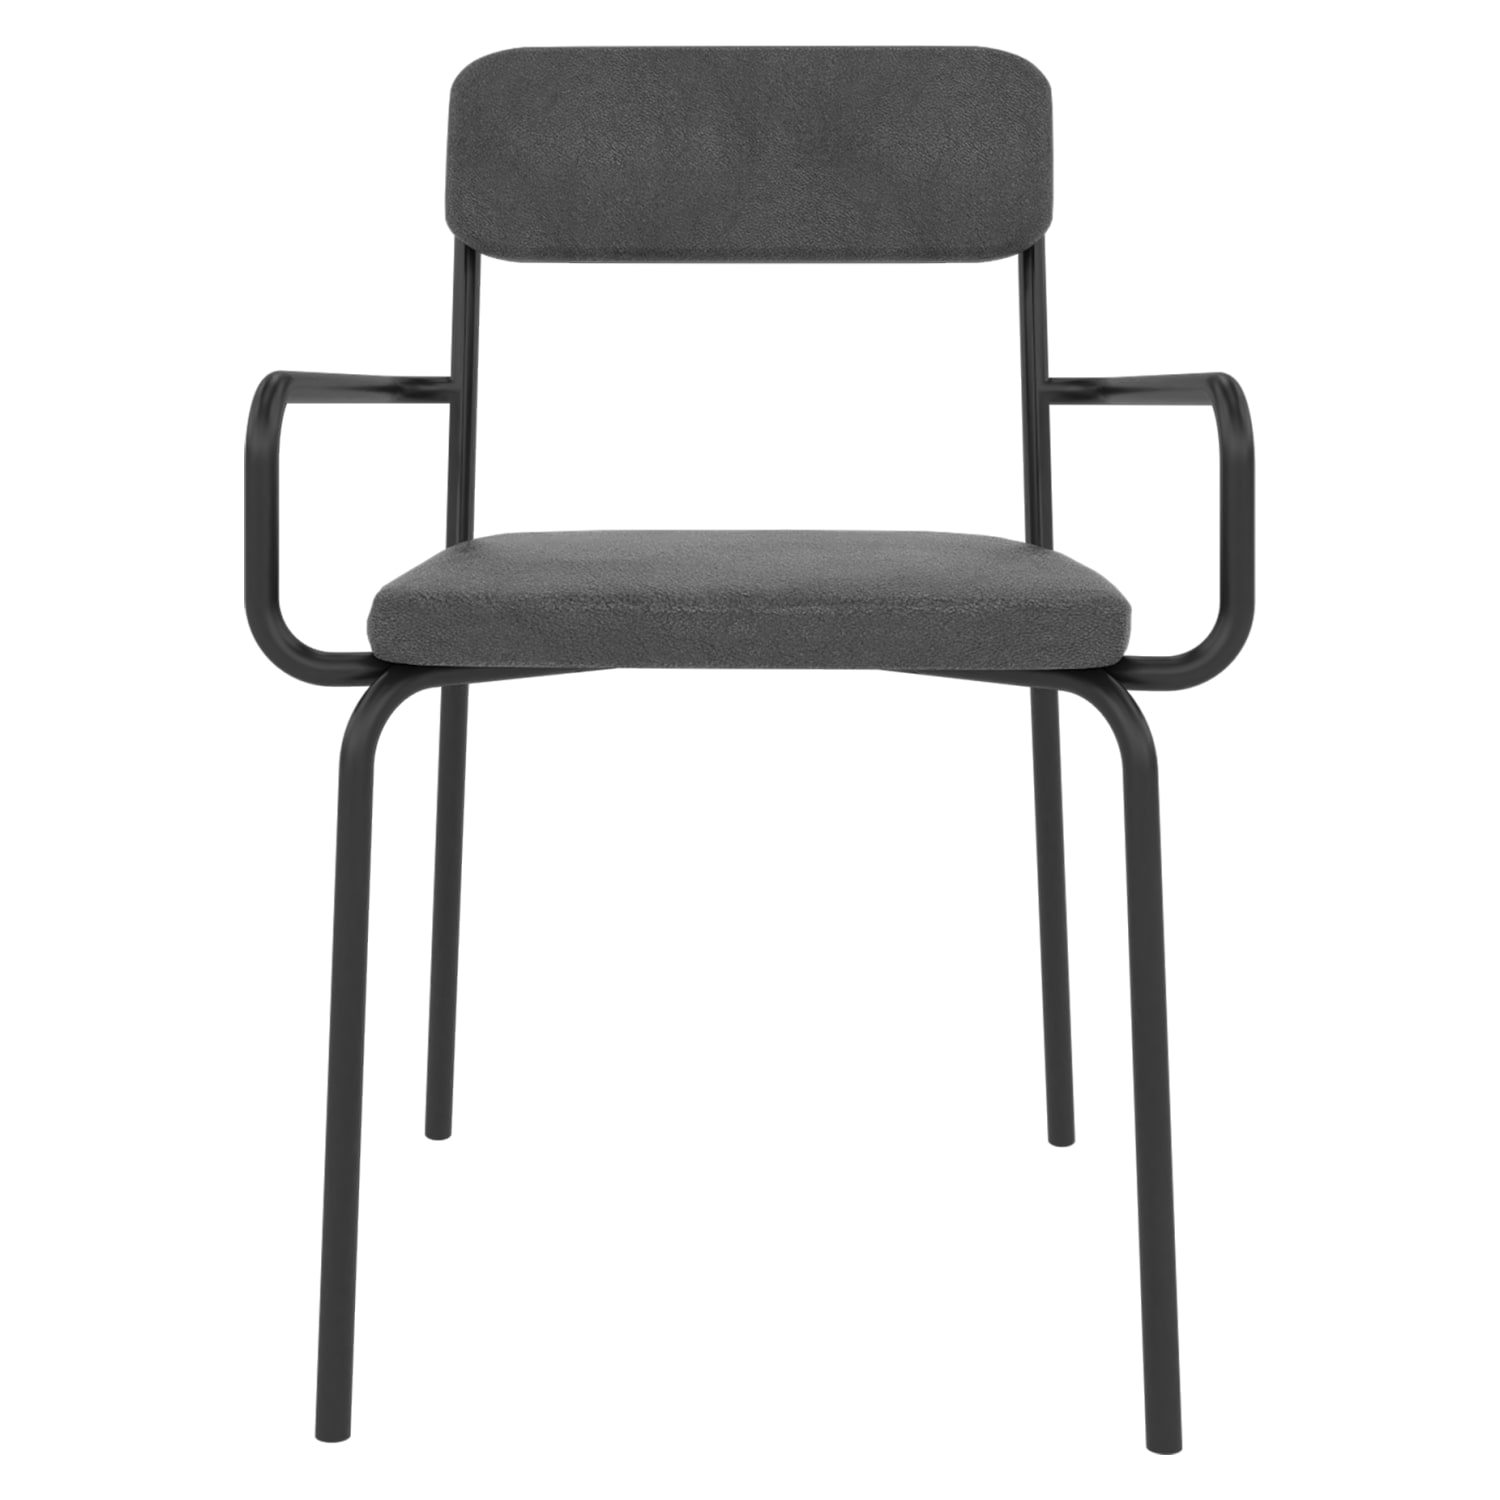 Whythe PU Leather Dining Chair in Black